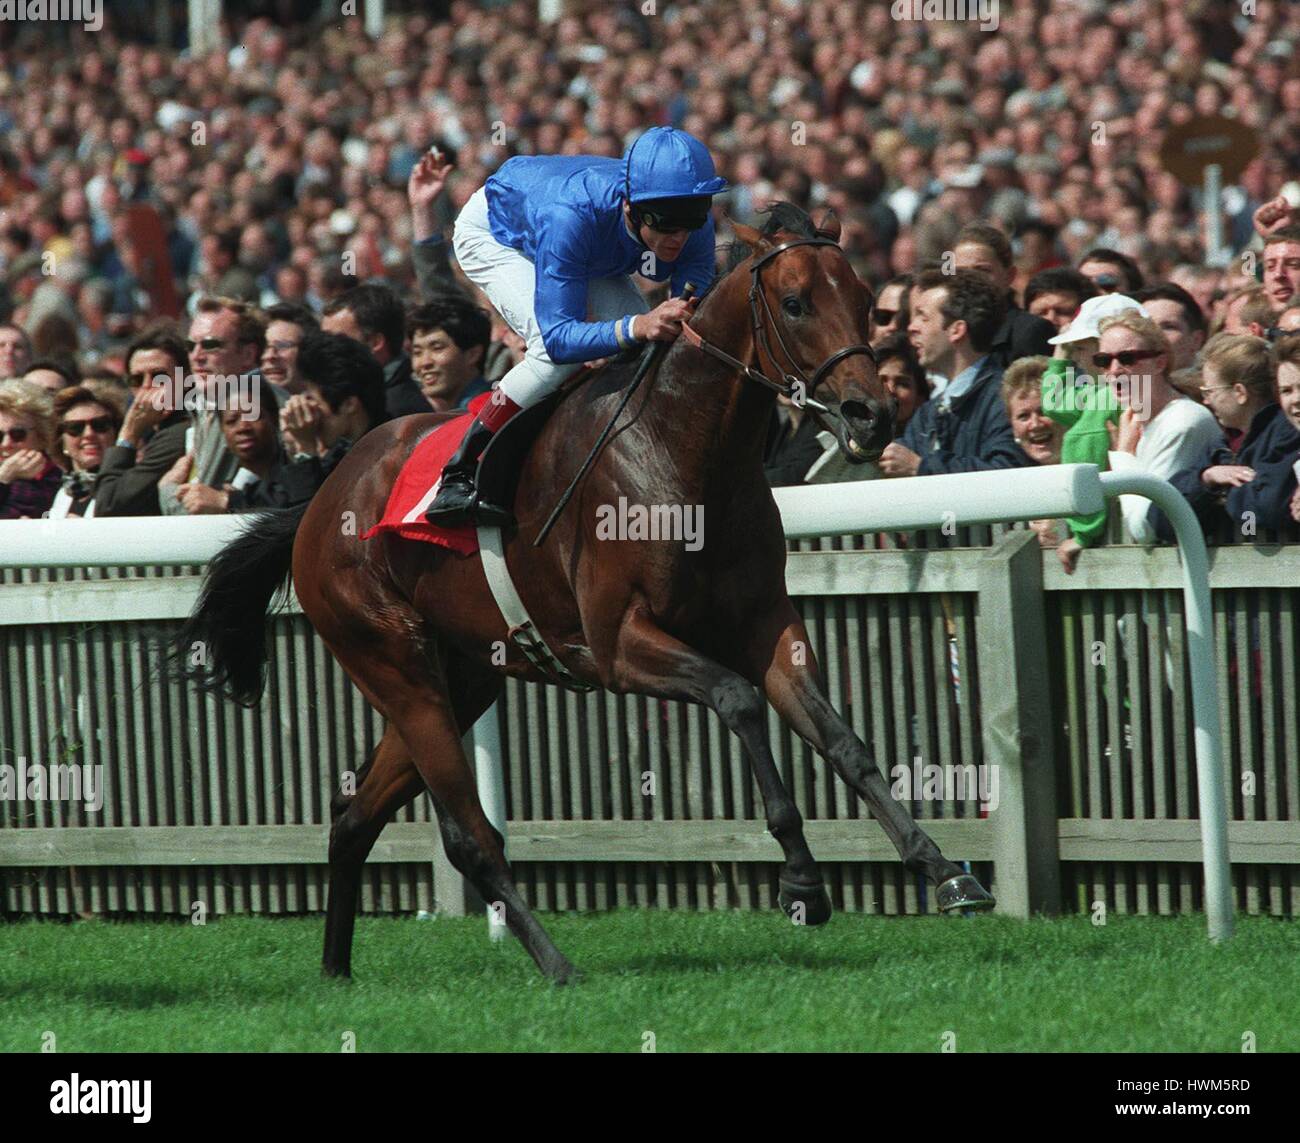 SWISS LAW WINS RACE PAGER STKS RIDDEN BY LANFRANCO DETTORI 23 May 1997 Stock Photo